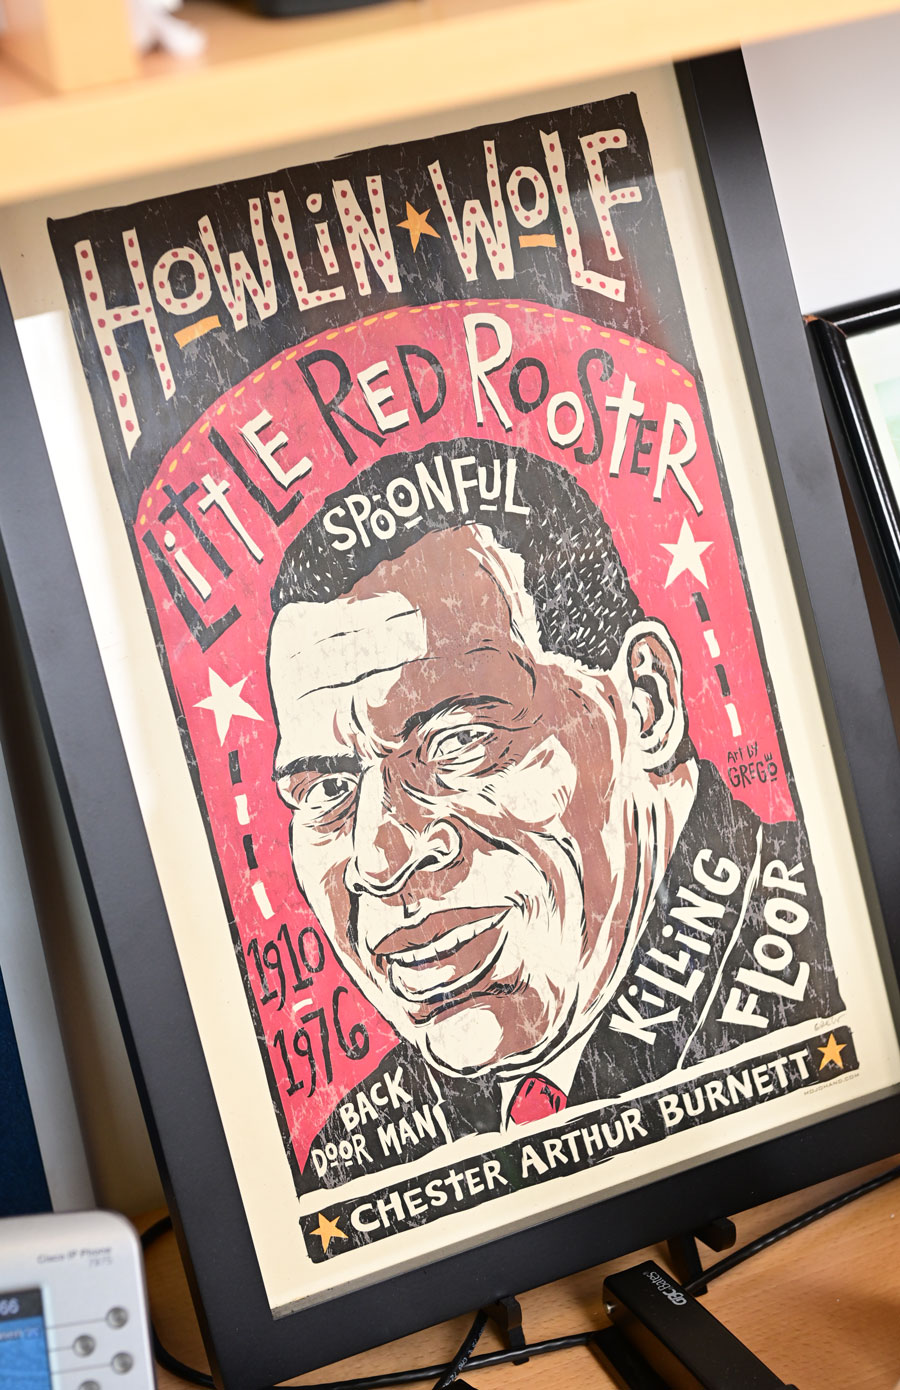 Framed poster of the blues artist who went by Howling Wolf